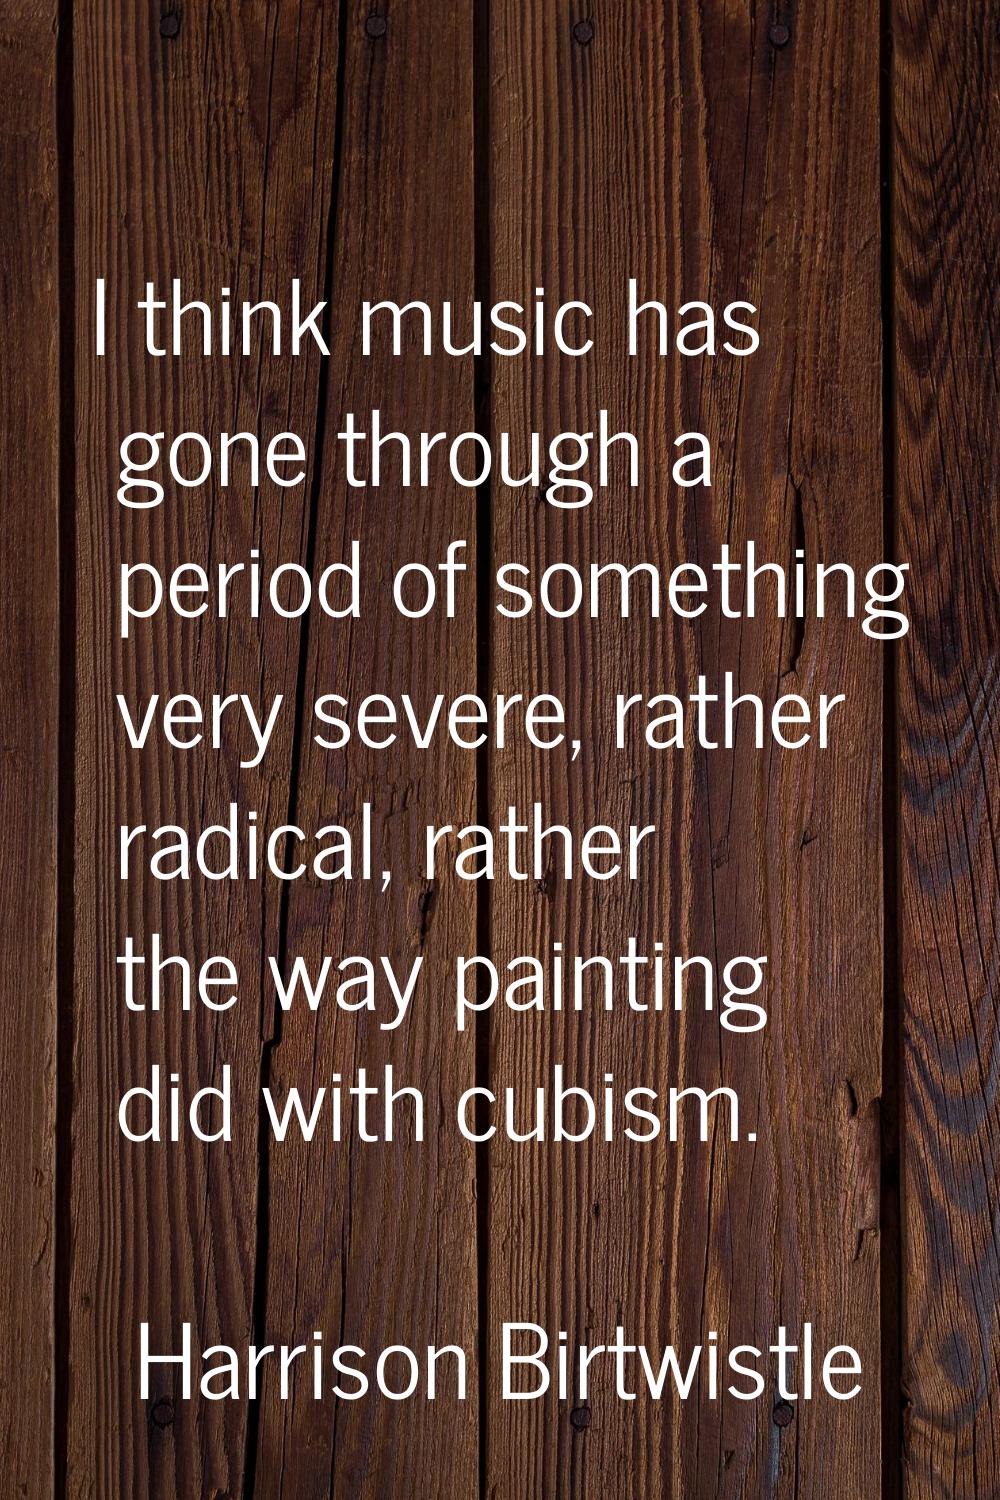 I think music has gone through a period of something very severe, rather radical, rather the way pa